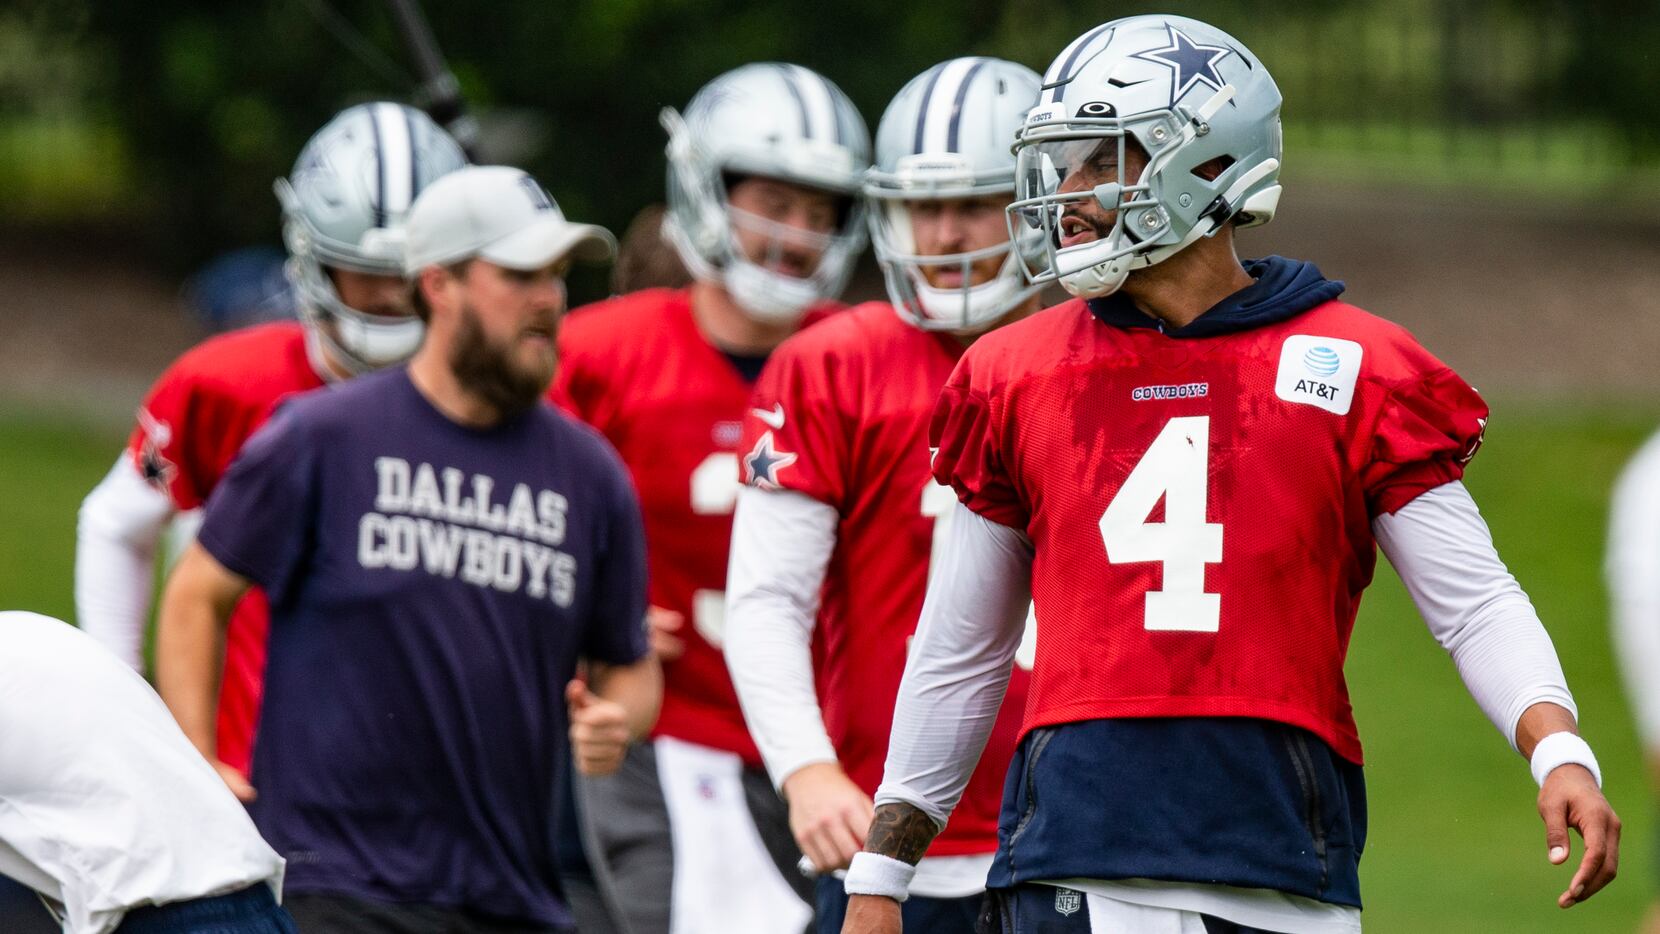 2021 NFL Kickoff: What to watch for in Cowboys-Buccaneers